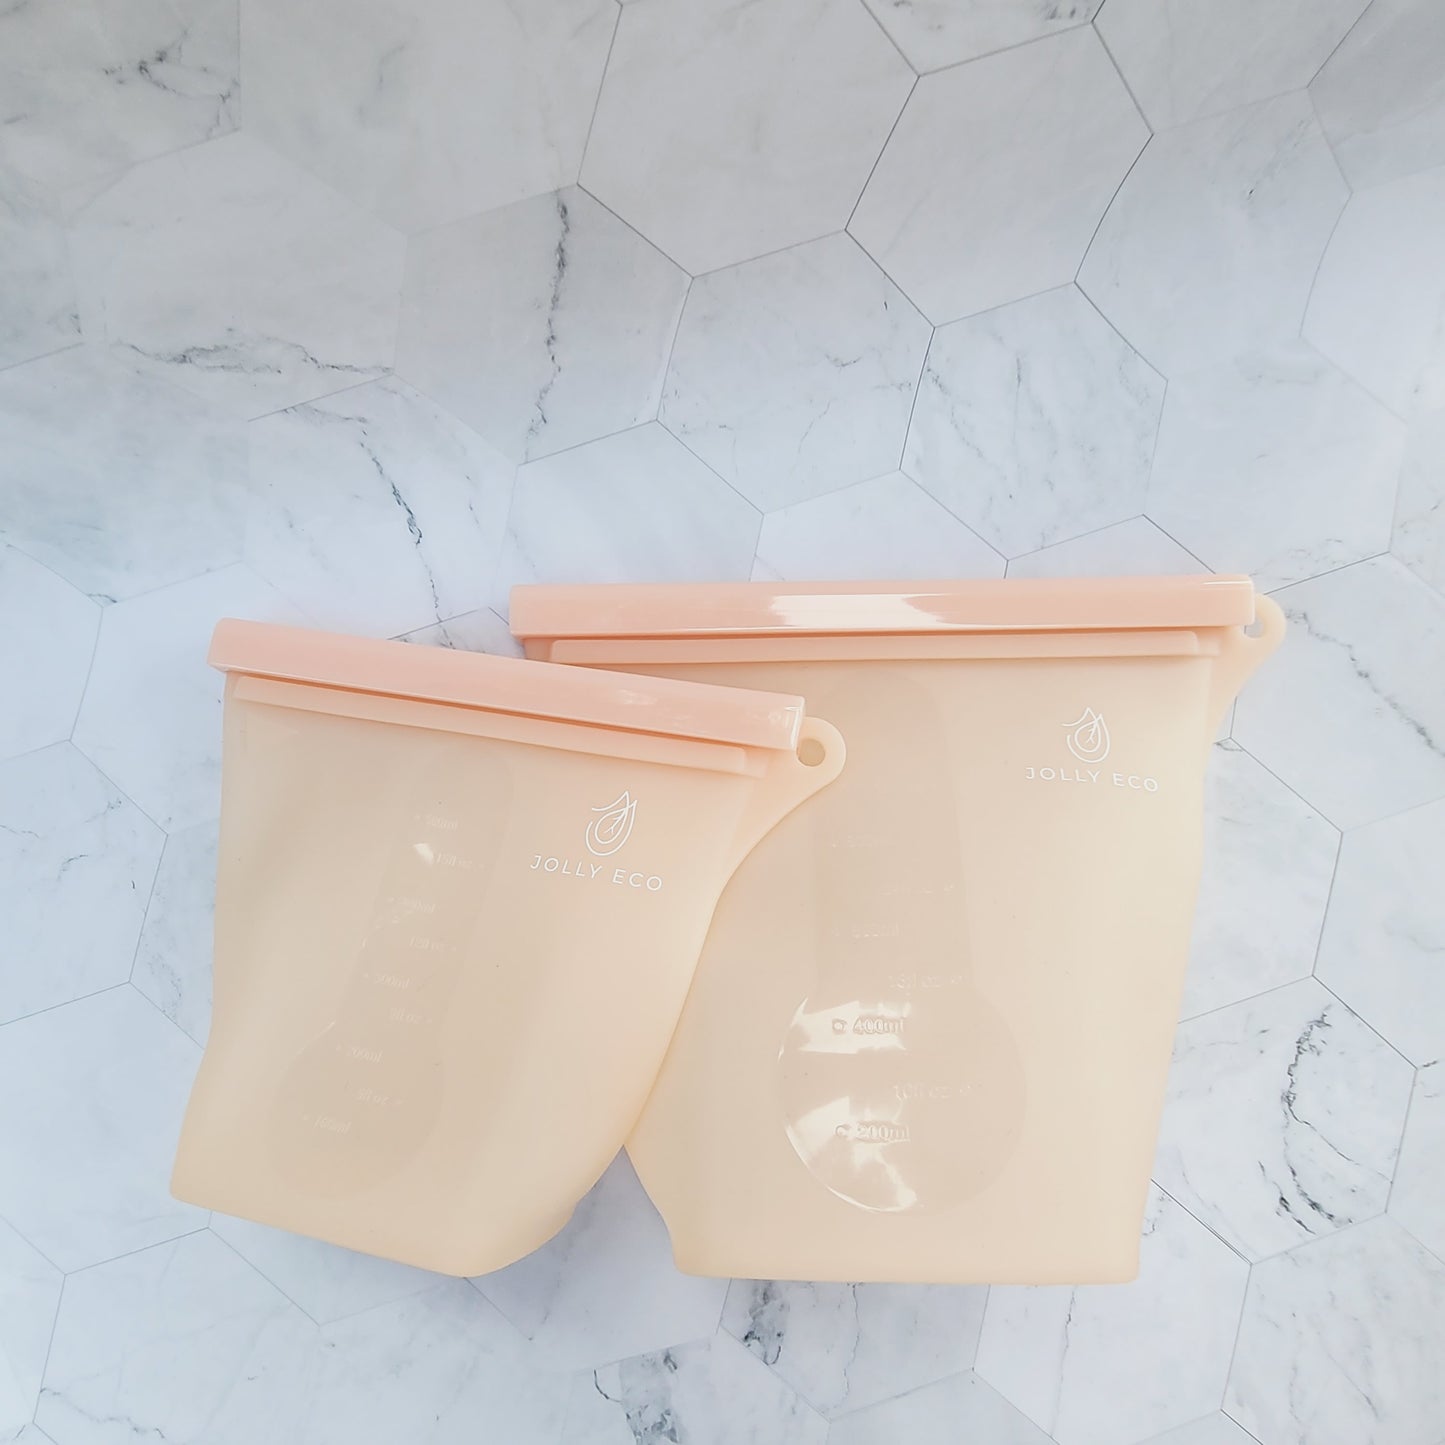 Silicone Food Pouch Set of 2 - Free Standing